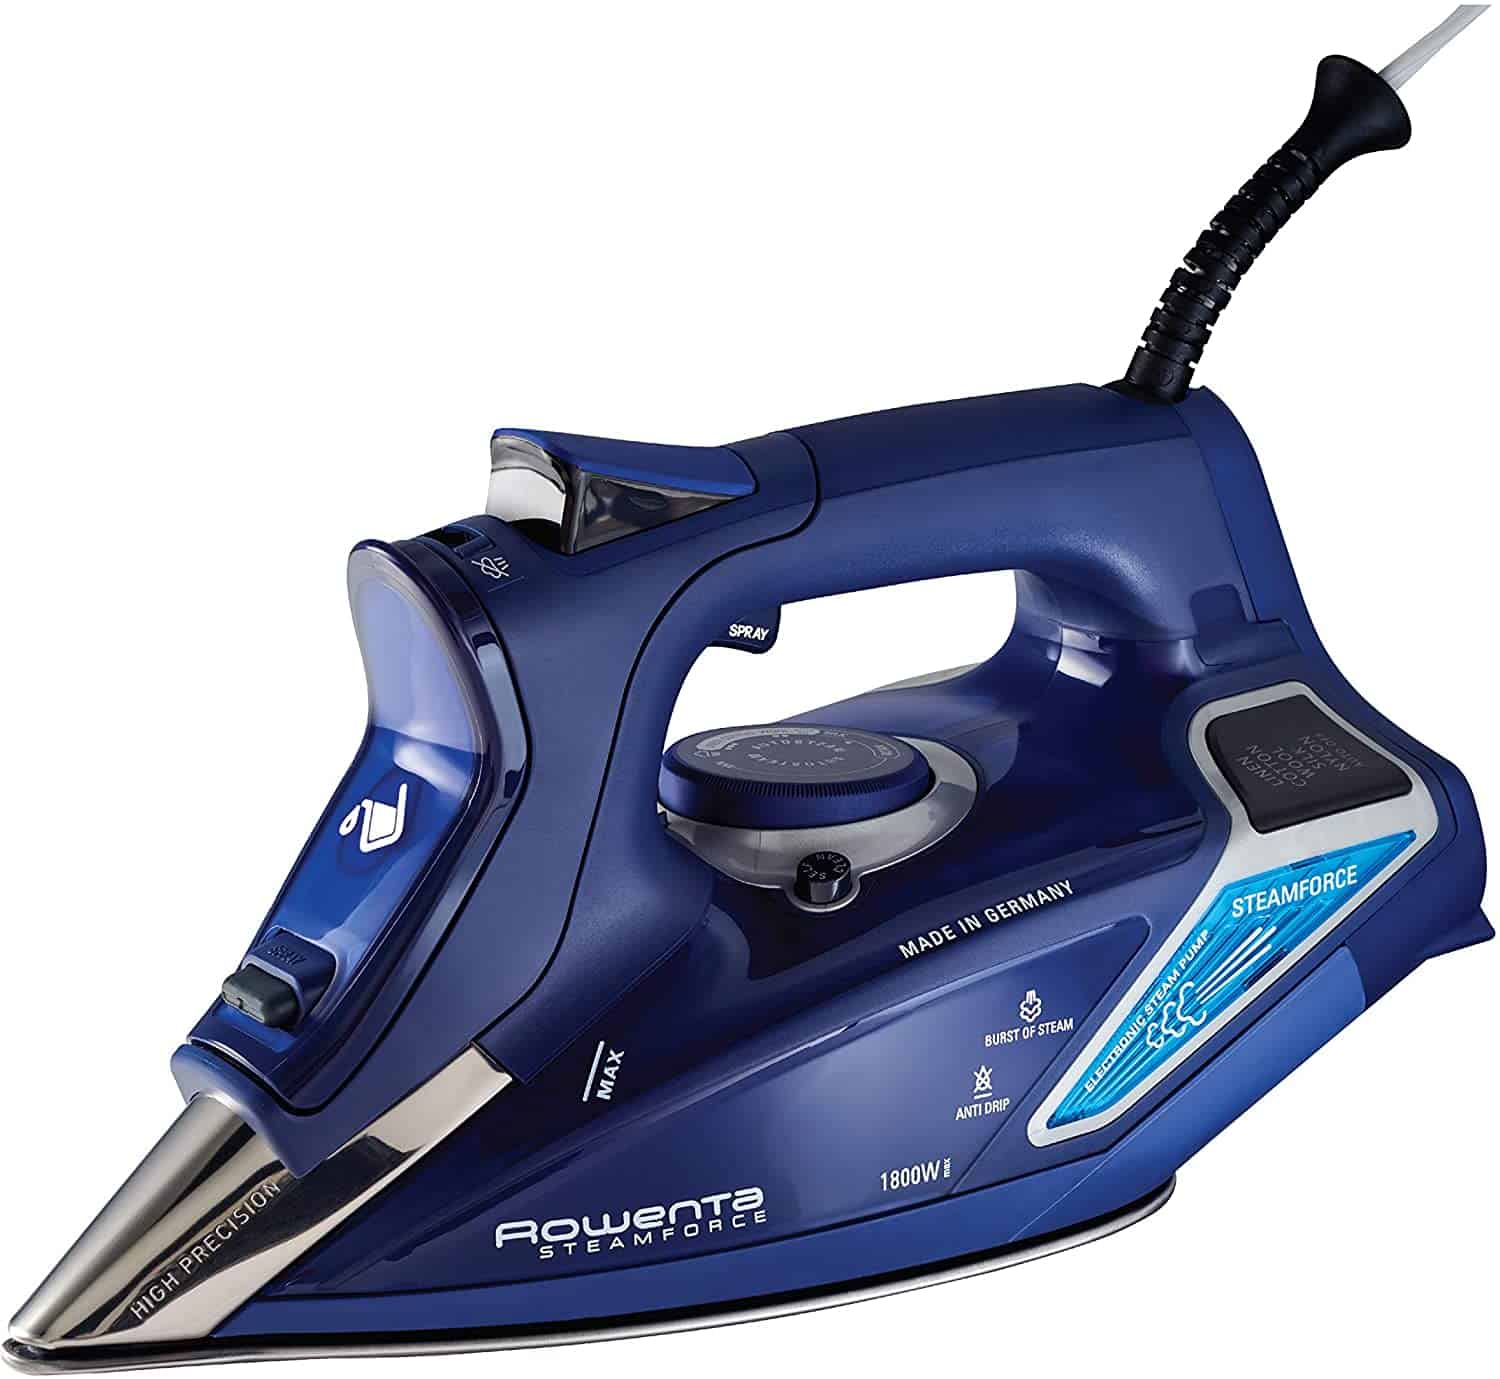 Best Steam Irons For Sewing